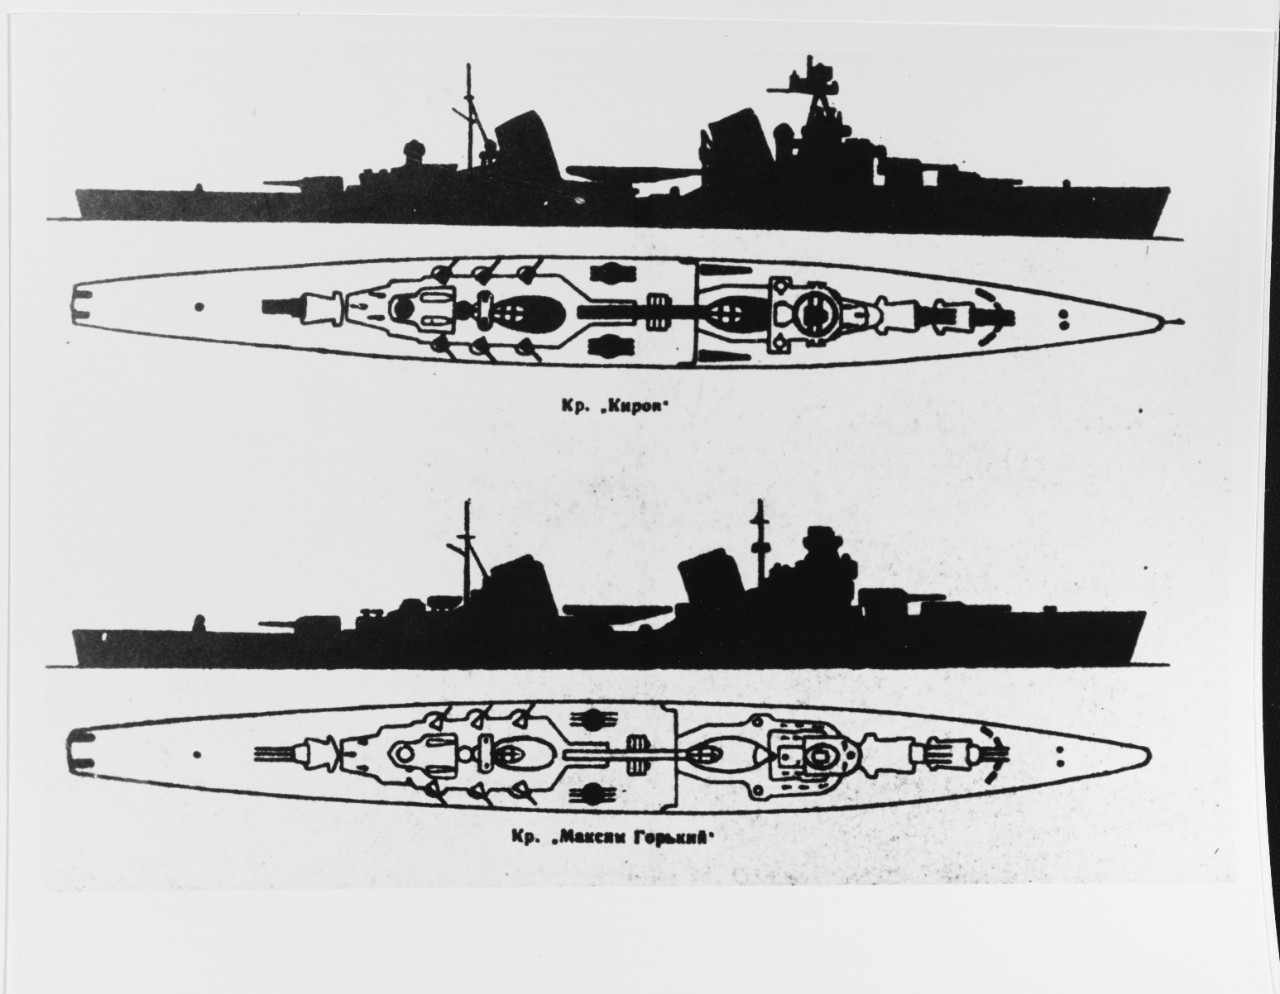 Soviet recognition drawings of two heavy cruisers--KIROV and MAKSIM GORKI, circa 1944